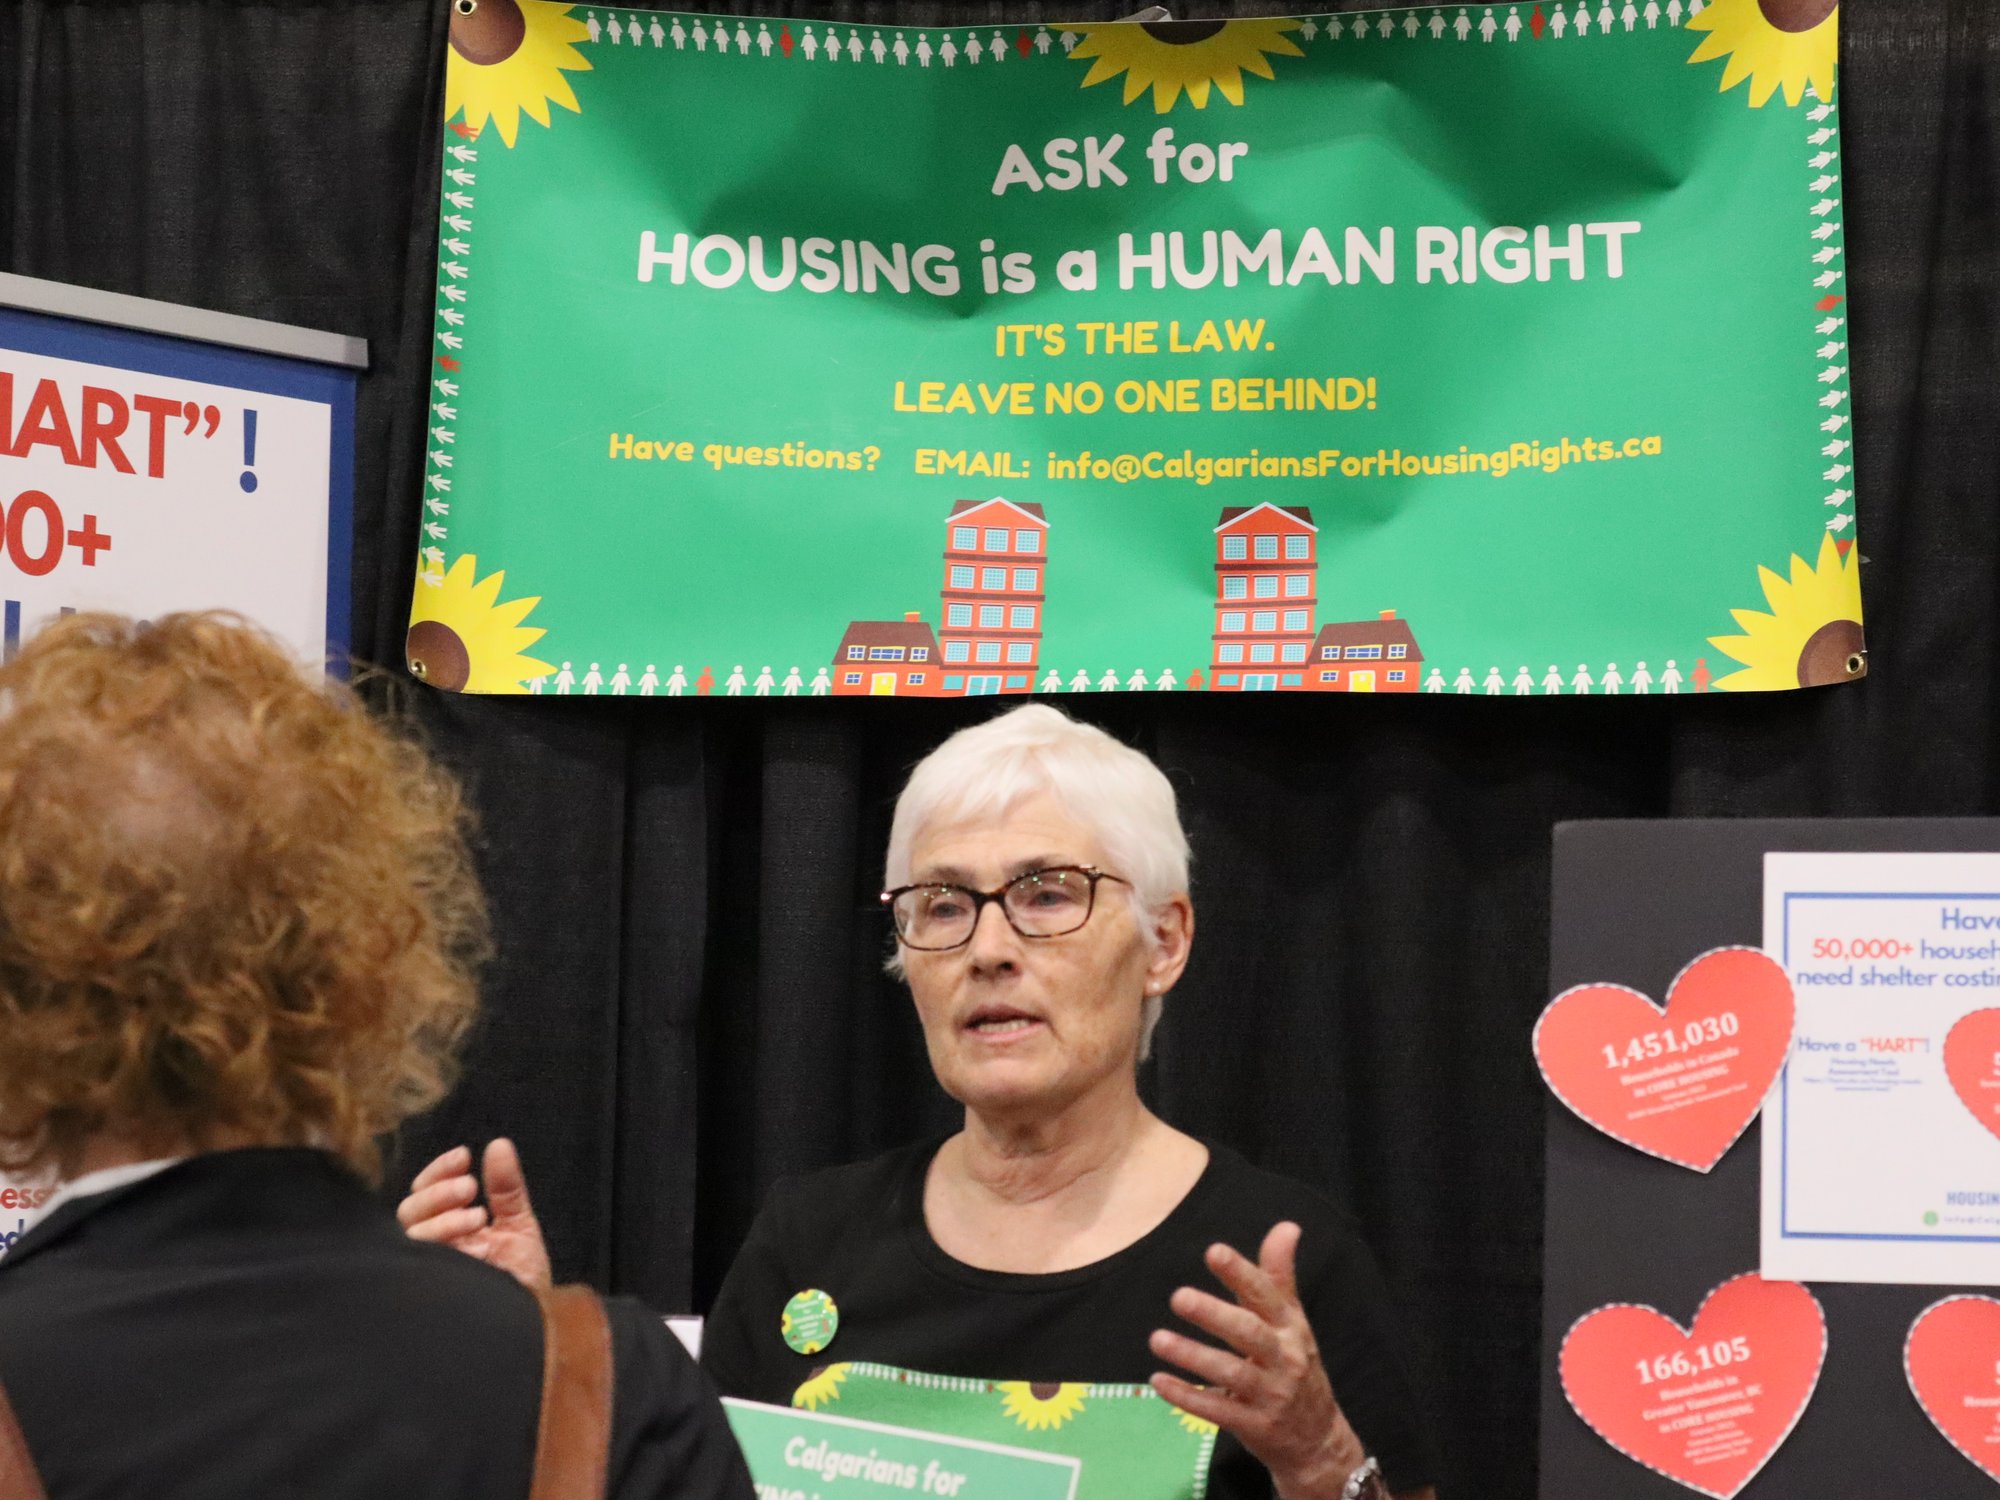 Calgarians for Housing is a Human Right